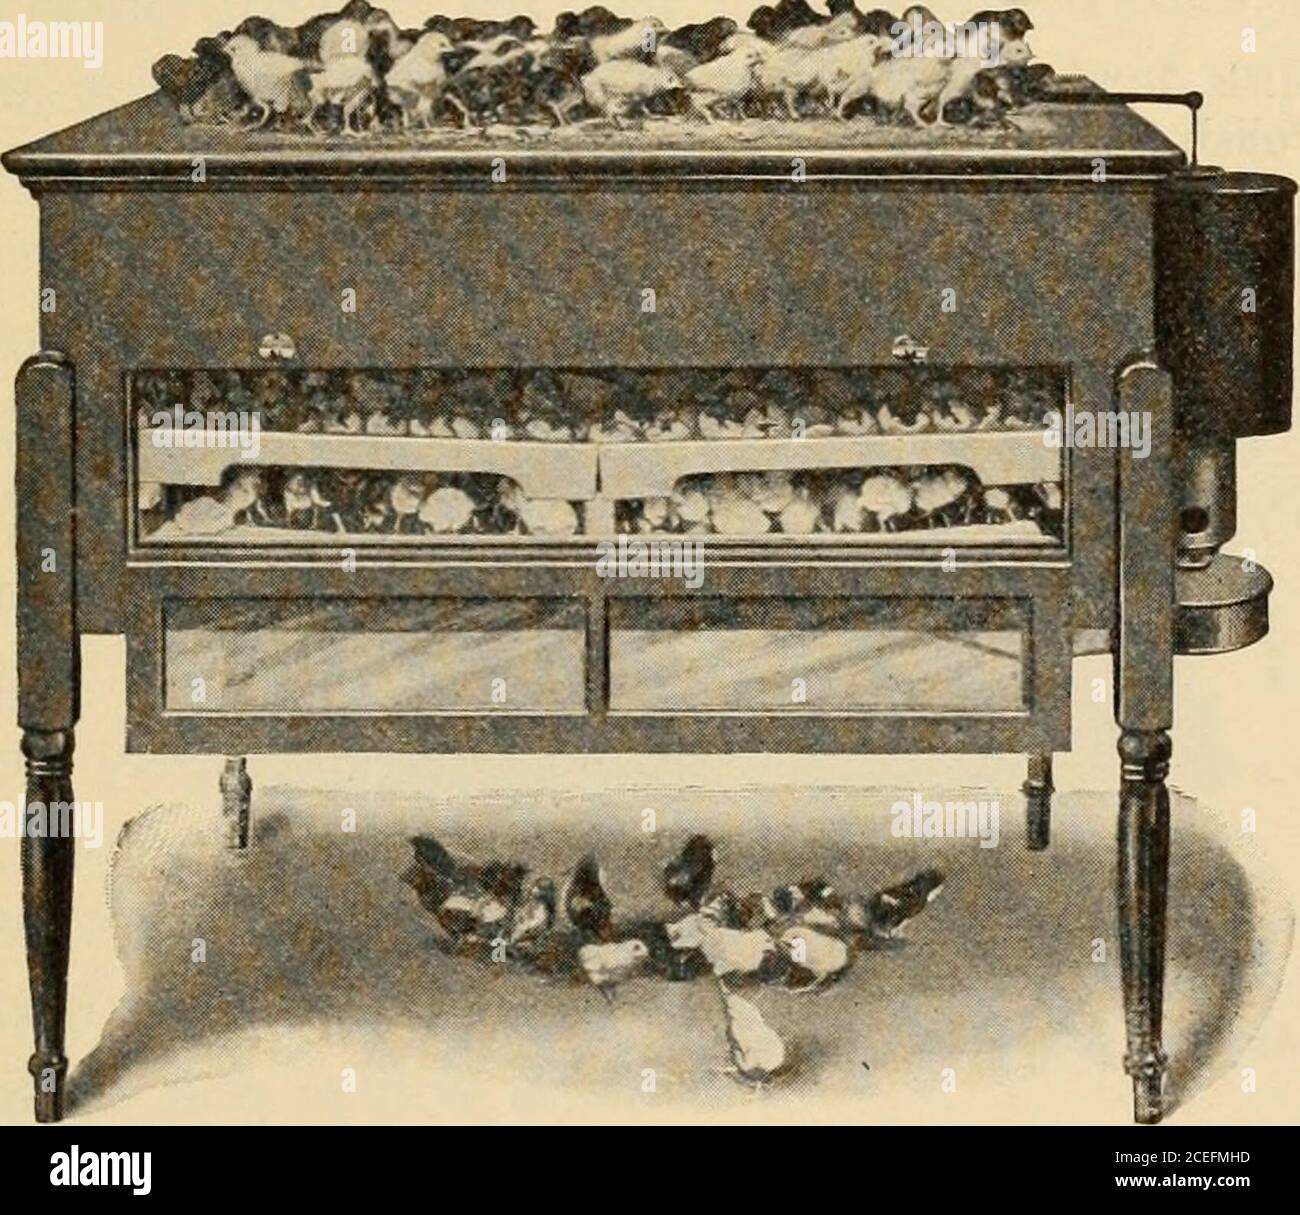 . Agriculture for beginners. Fig. i86. Breeding Yards &gt;^^^^^;^. Fig. 187. Incubator 205 2o6 AGRICULTURE FOR BEGINNERS Geese, ducks, and turkeys are not so generally raised ashens, but there is a constant demand at good prices forthese fowls. The varieties of the domestic hen are as follows: I. Egg BreedsI. Leghorn. 2. Minorca. 3. Spanish. 4. Blue Andalusian.5. Ancoras. II. Meat BreedsI. Brahma. 2. Cochin. 3. Langshan. 4. Dorking. 5. Cornish. III. General Purpose Breeds I. Plymouth Rock. 2. Wyandotte. 3. Rhode Island Red. 4. Orpington. IV. Faticy BreedsI. Polish. 2. Game. 3. Sultan. 4. Banta Stock Photo